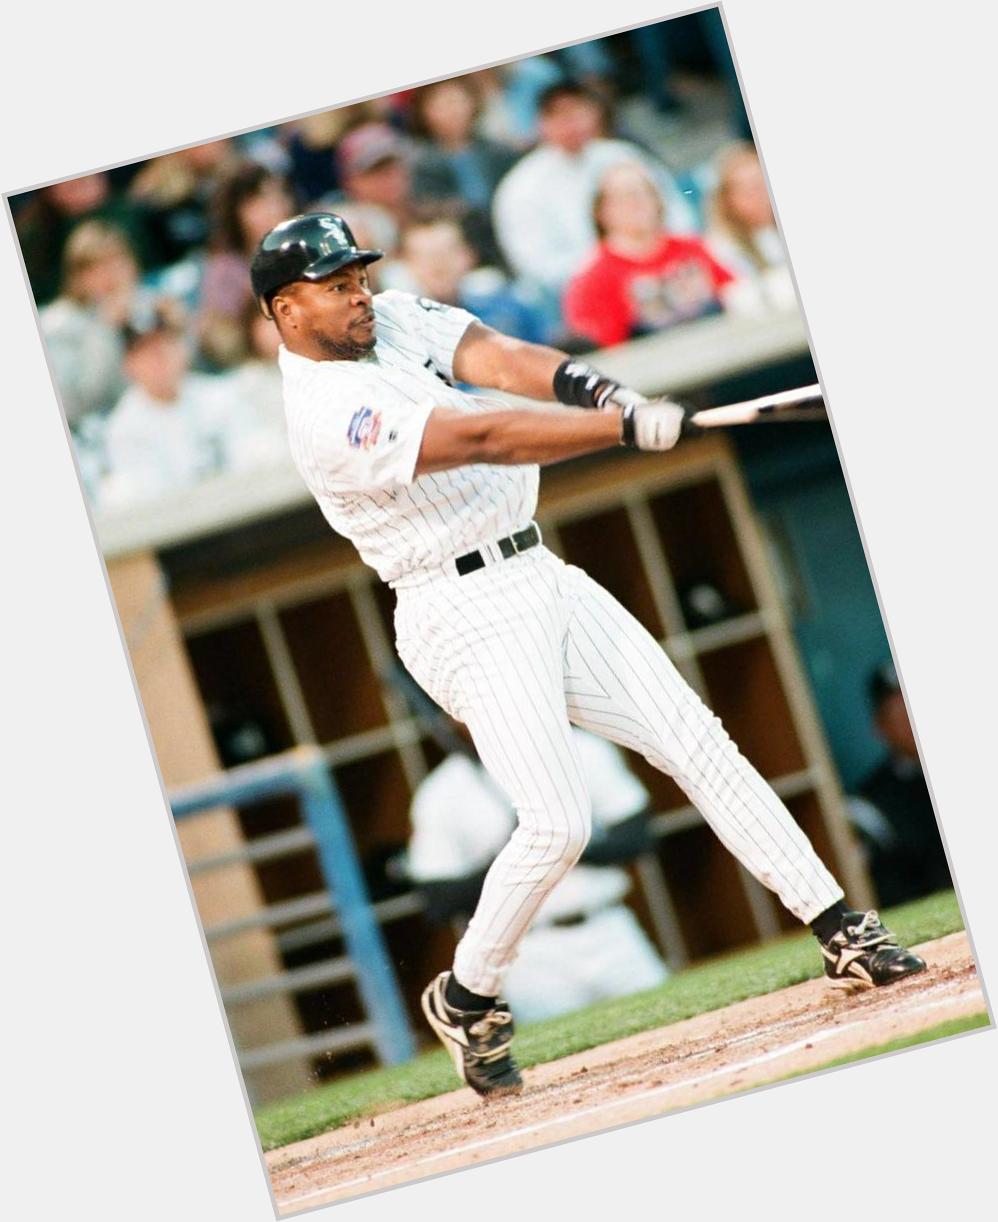 Happy 49th Birthday to former Albert Belle! An OF/DH 1997-98, he hit .301 in 324 G, 1407 PA and 1243 AB. 